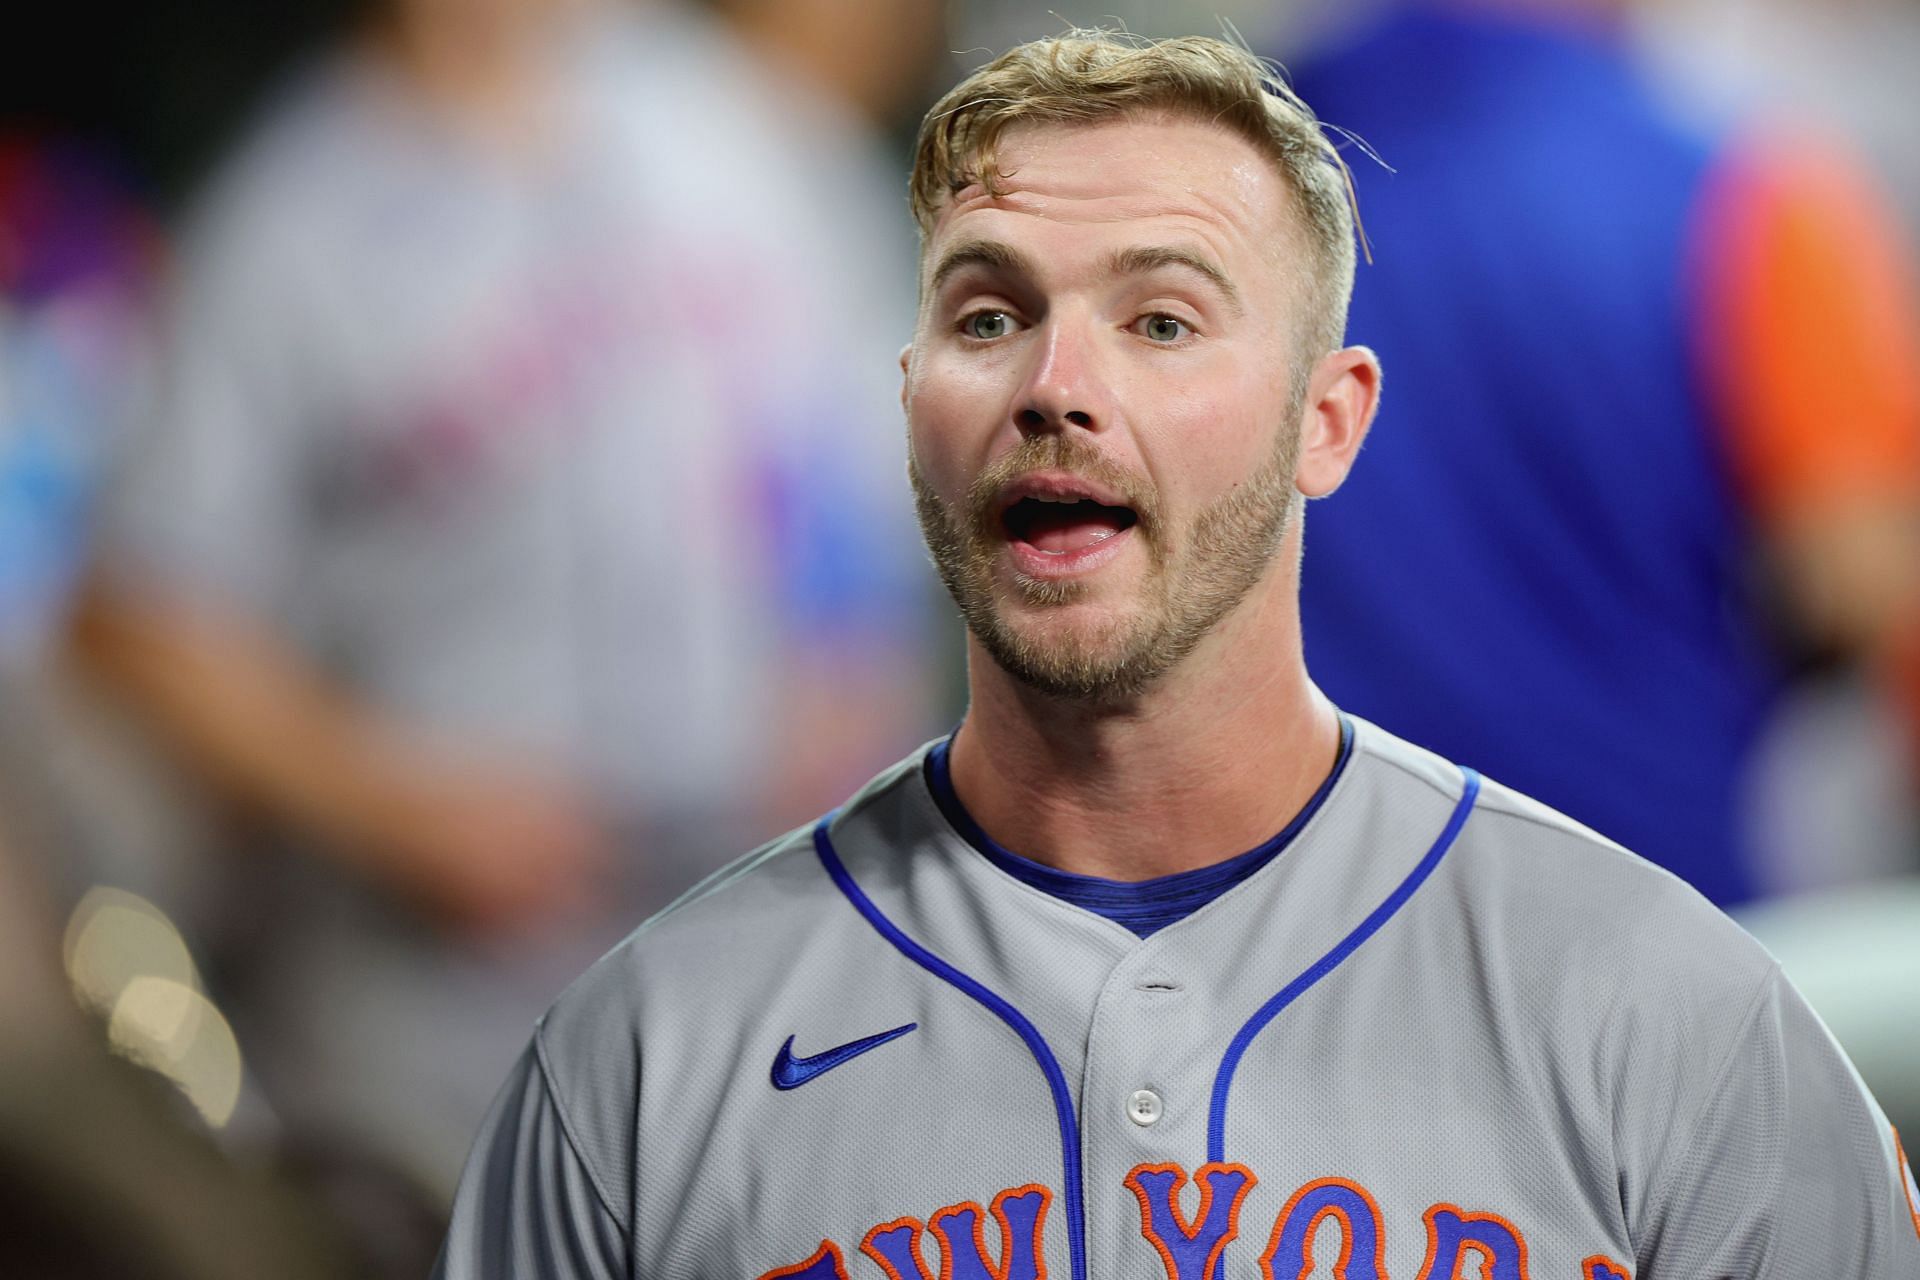 Pete Alonso, the Giddy Star Rising in Queens - The New York Times